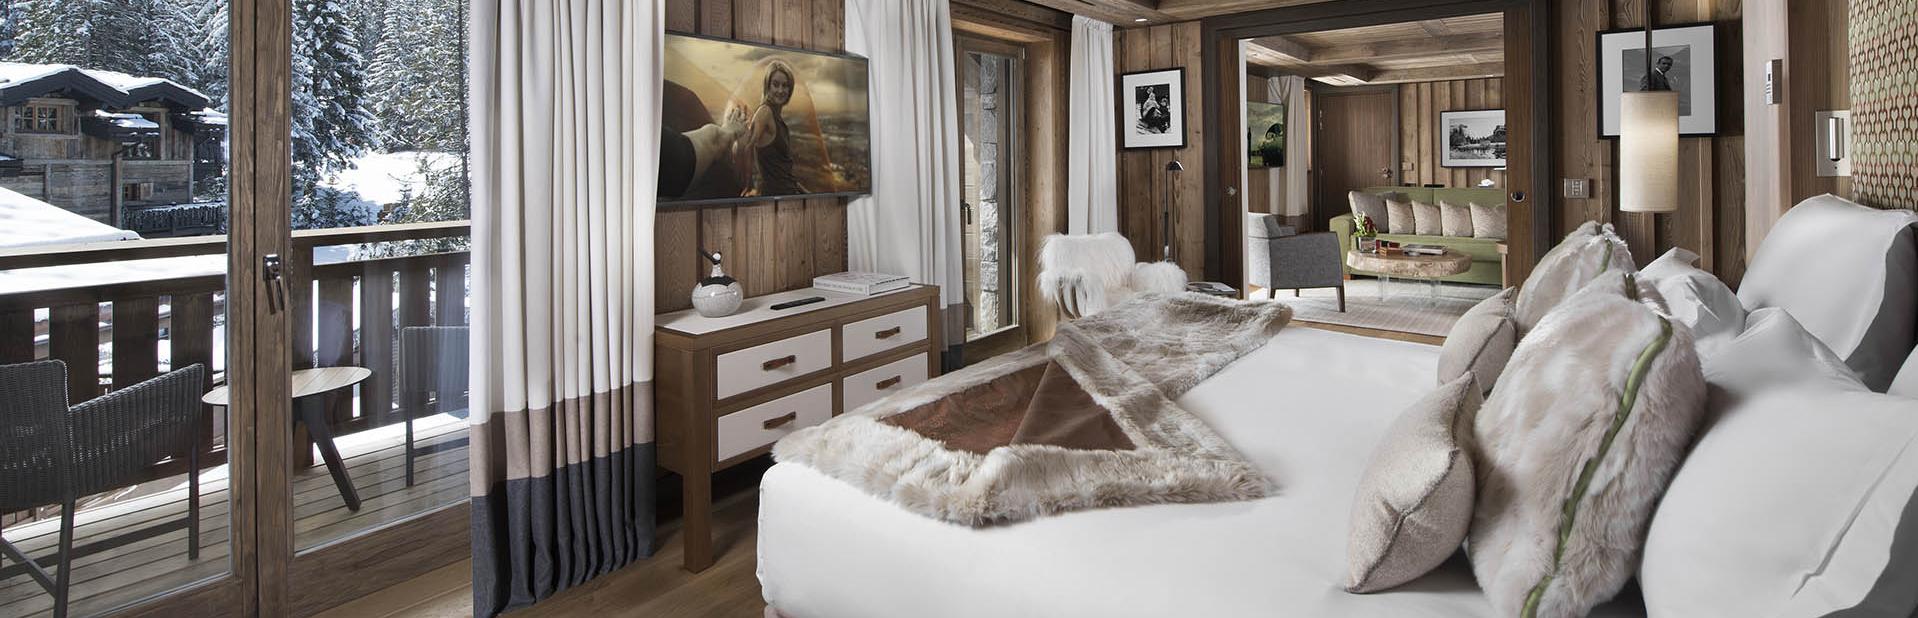 Hotel Barriere Les Neiges Courchevel